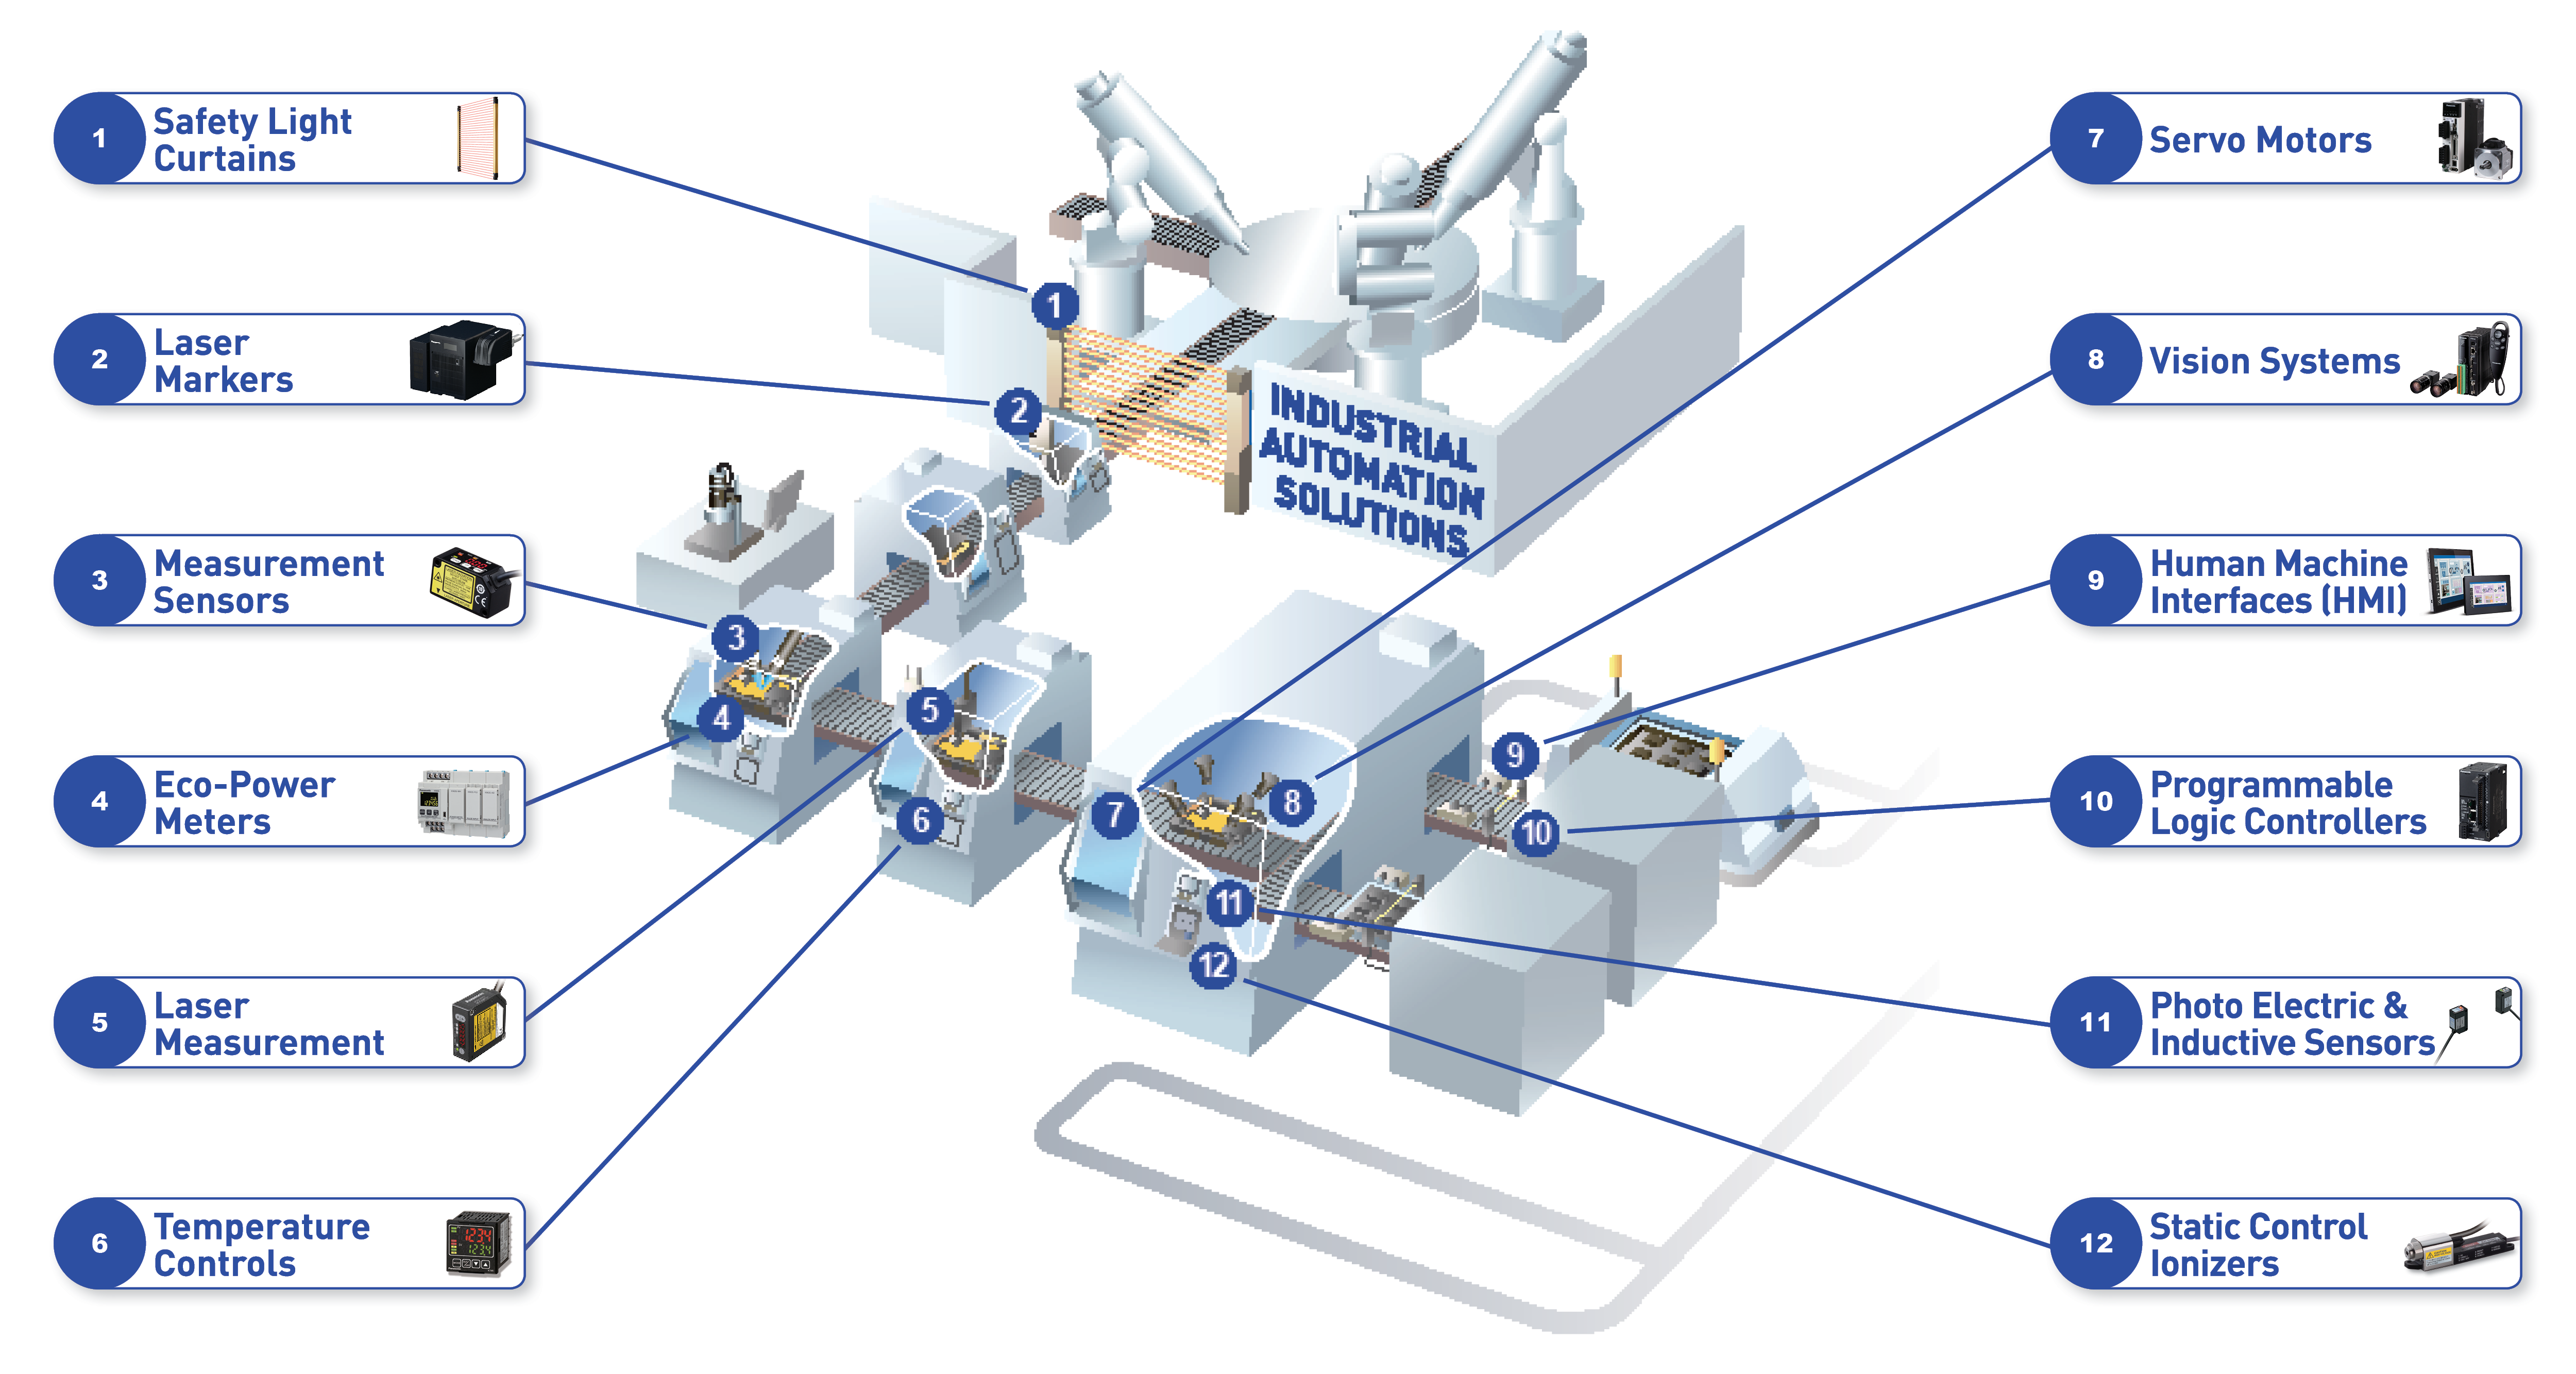 Industrial Automation Solutions | Panasonic Industrial Devices